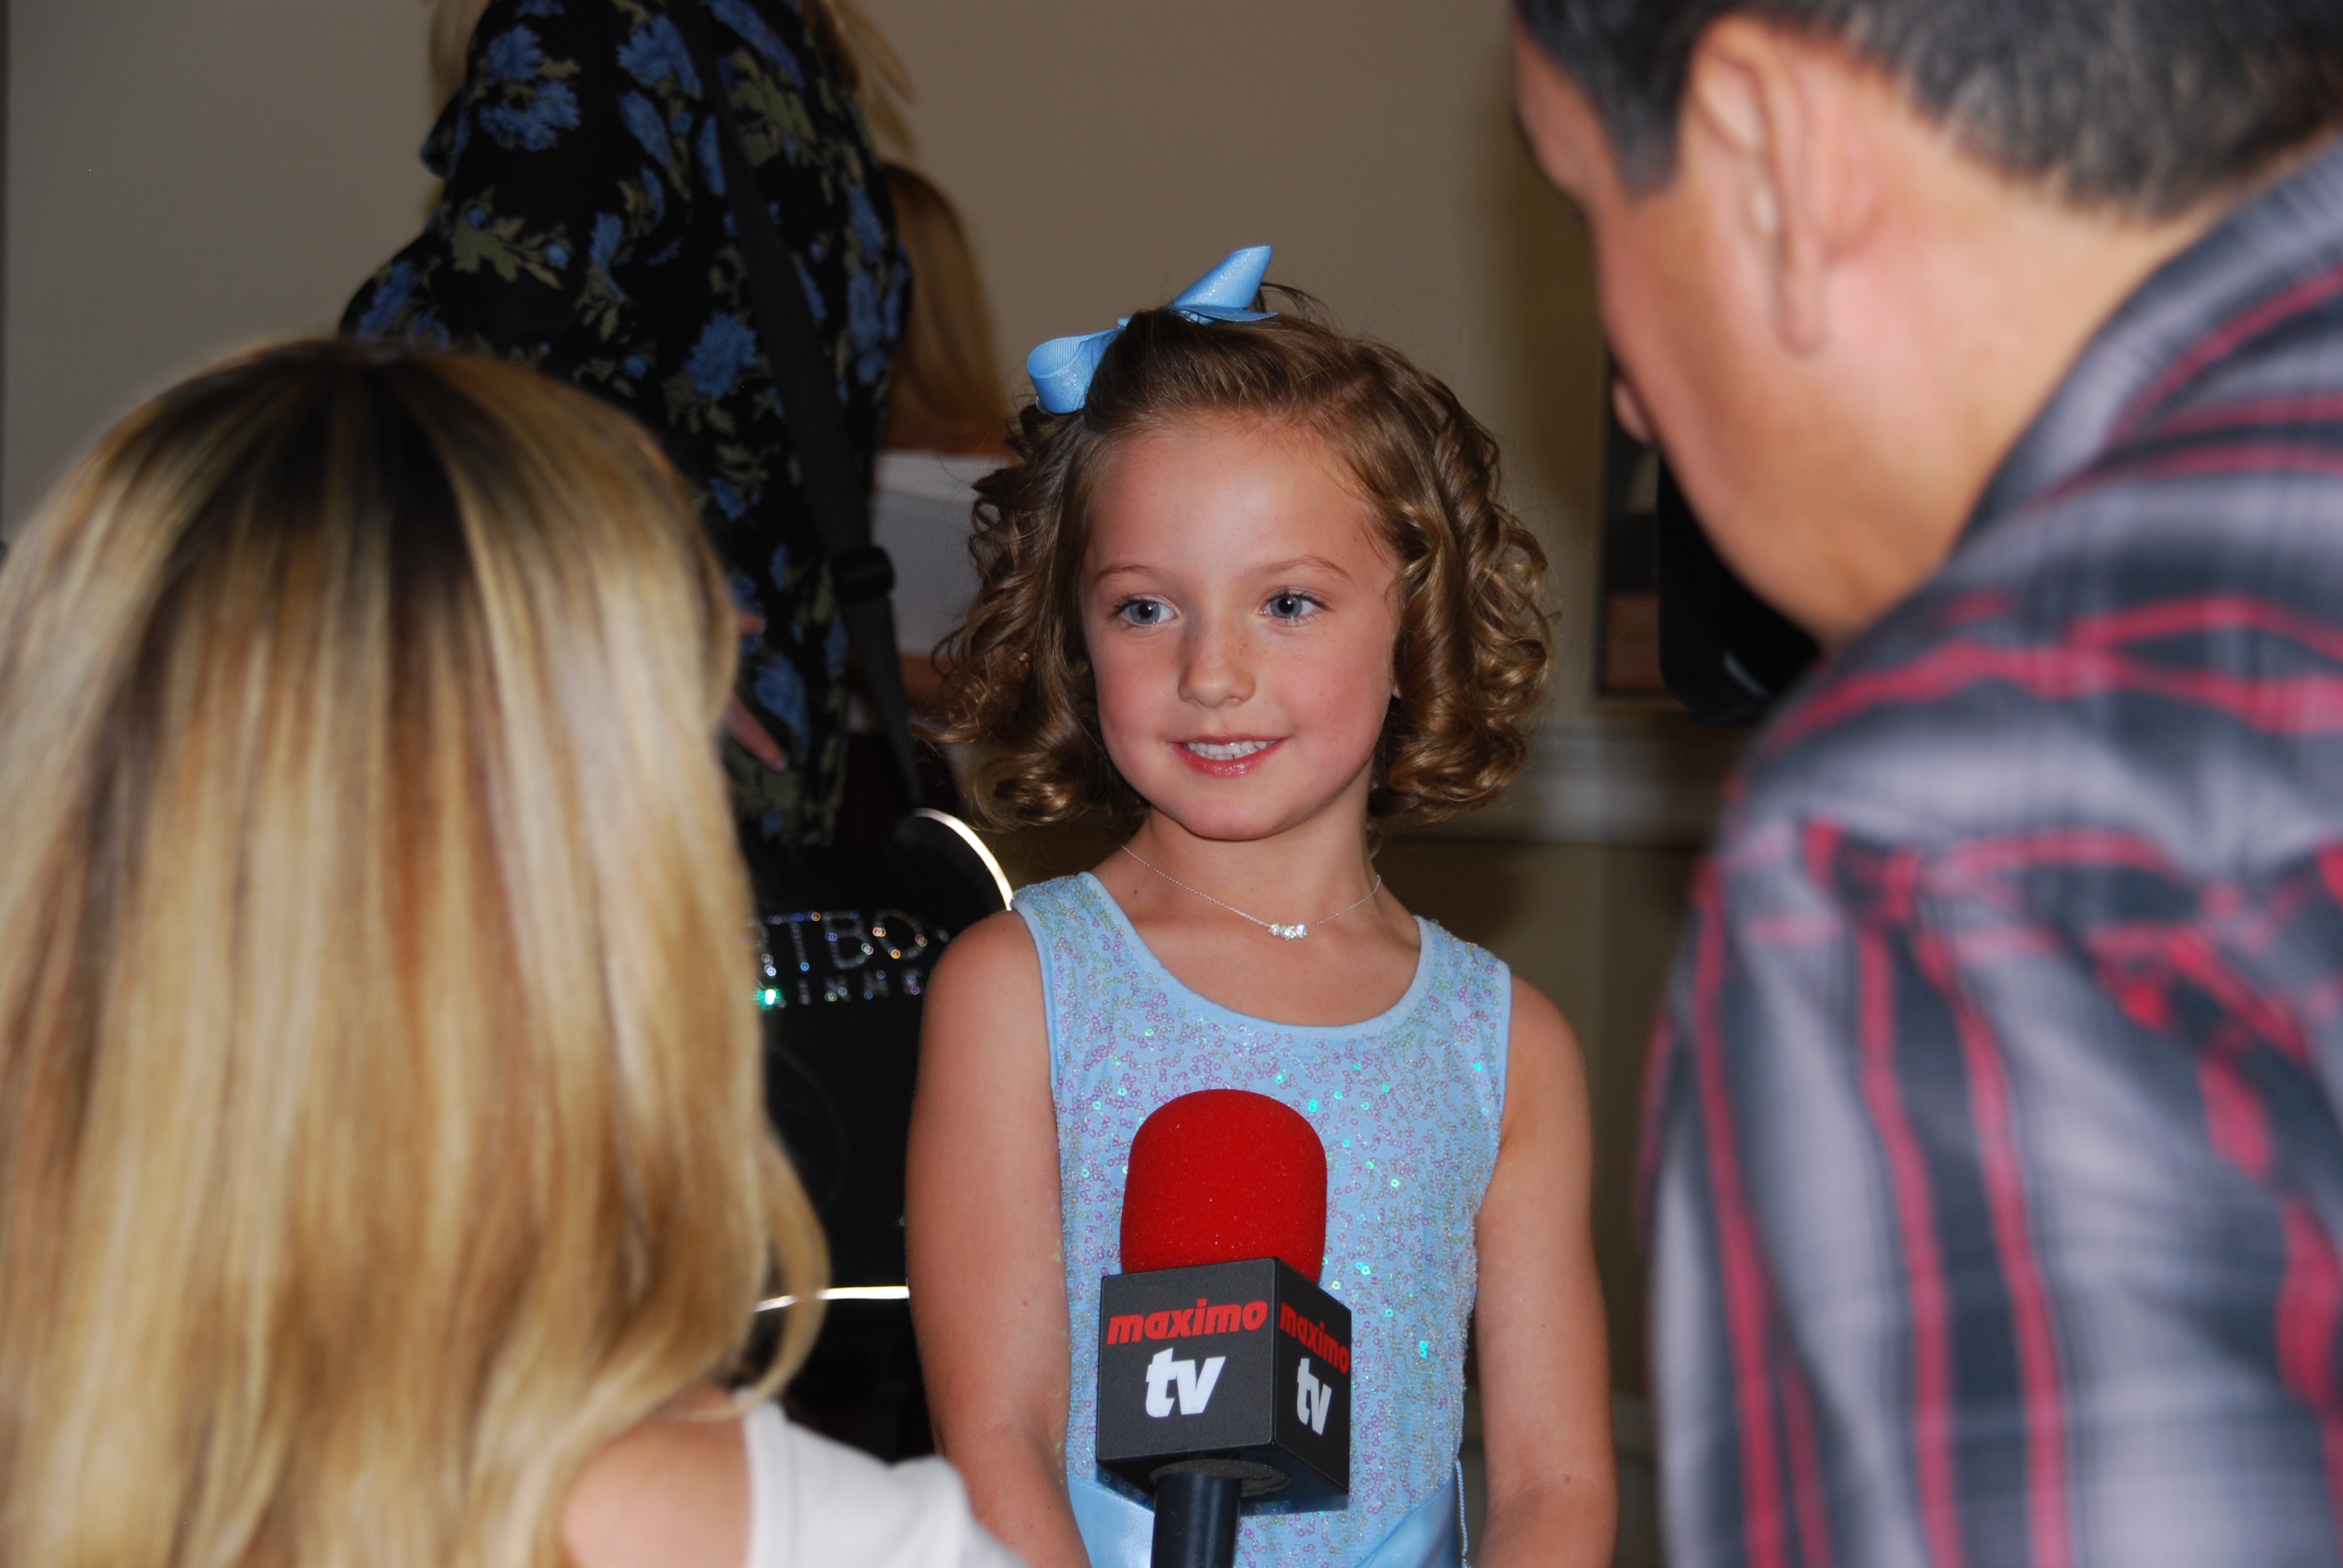 Sunnie being interviewed at the Young Artist Awards